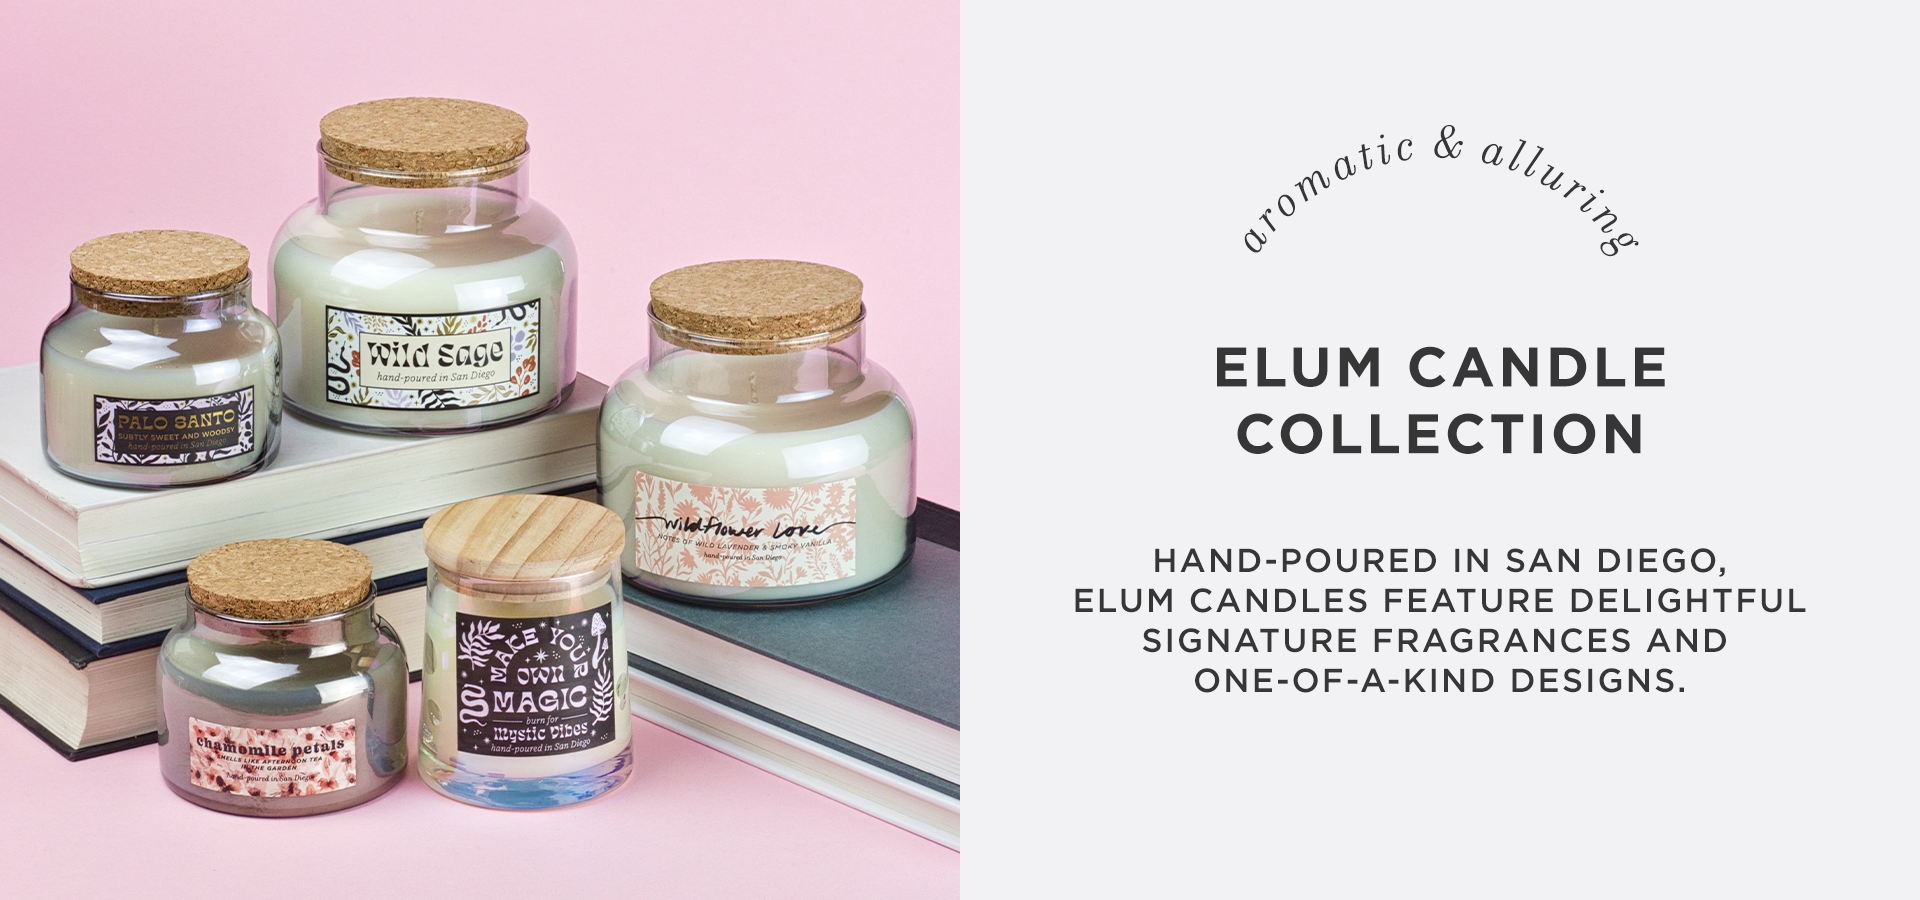 Elum Crystal Candle Collection